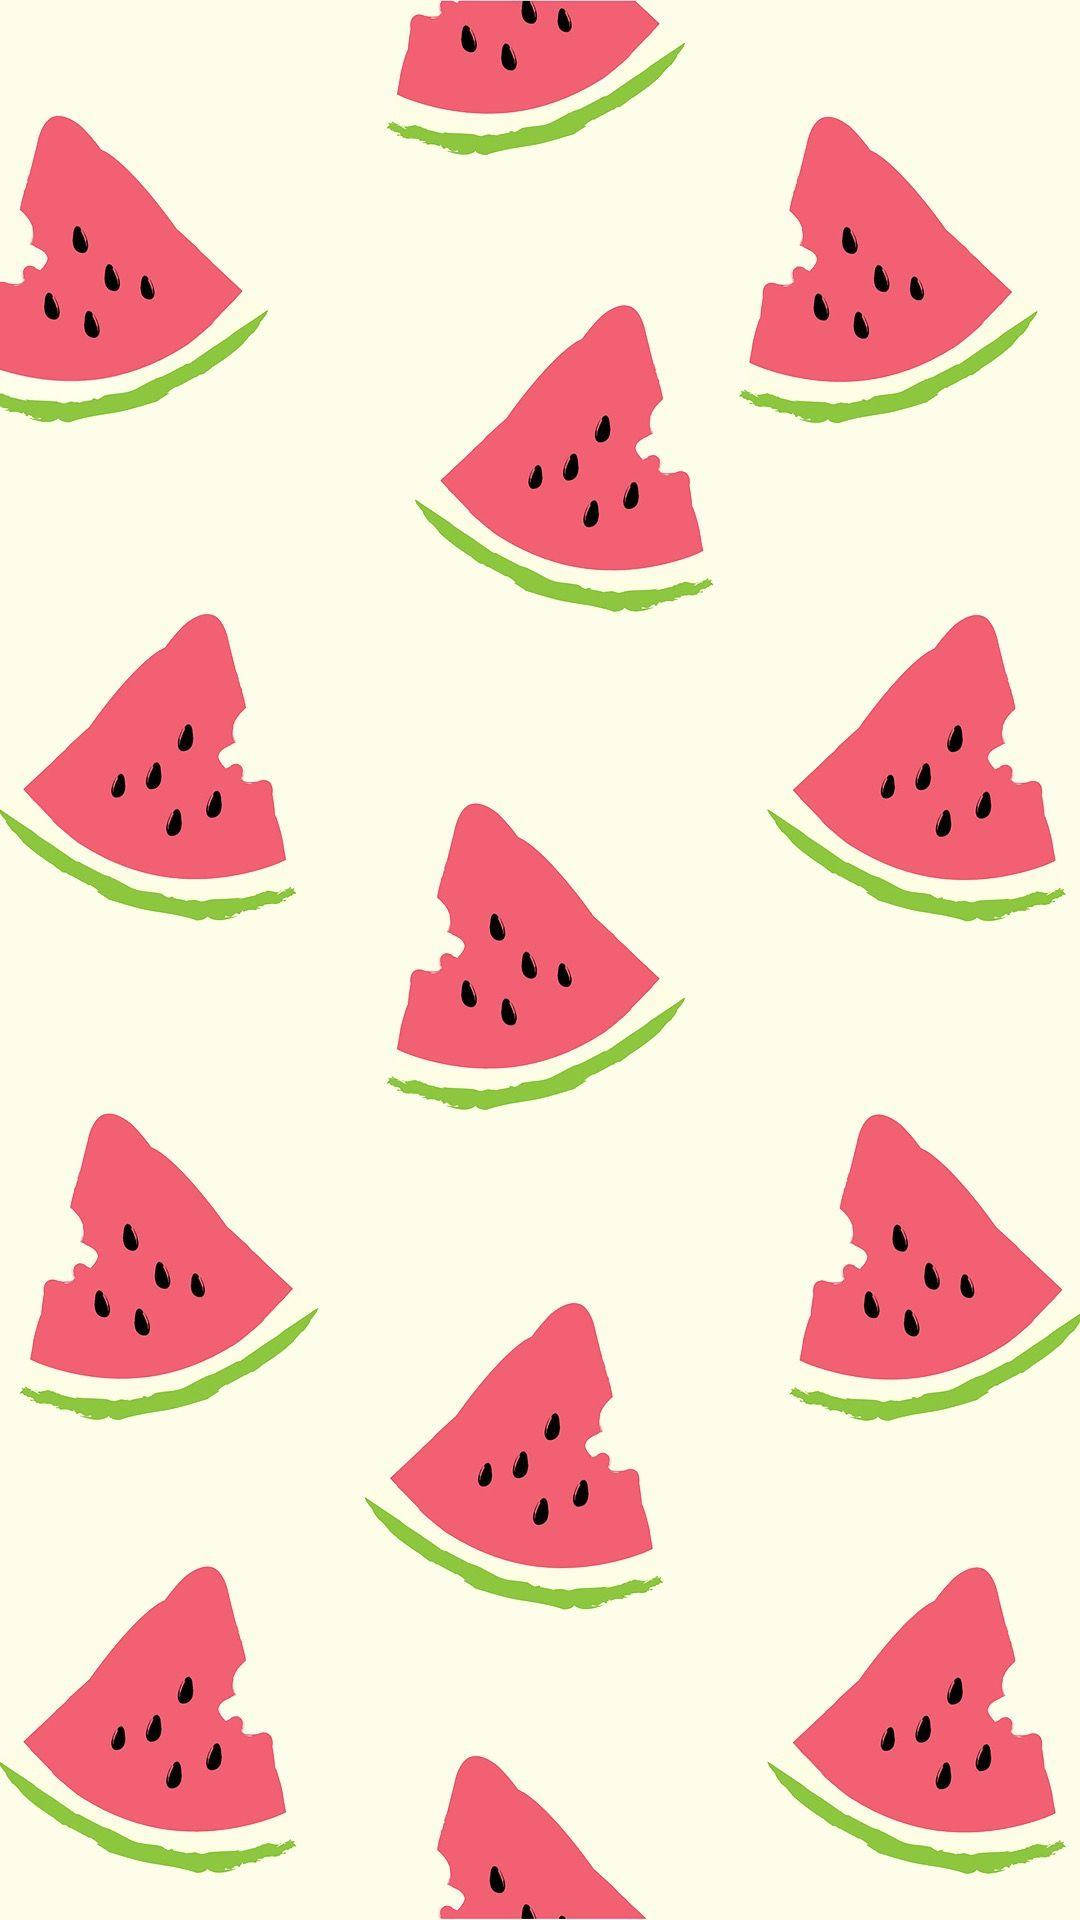 Cute Heart Shaped Watermelon Slices Background